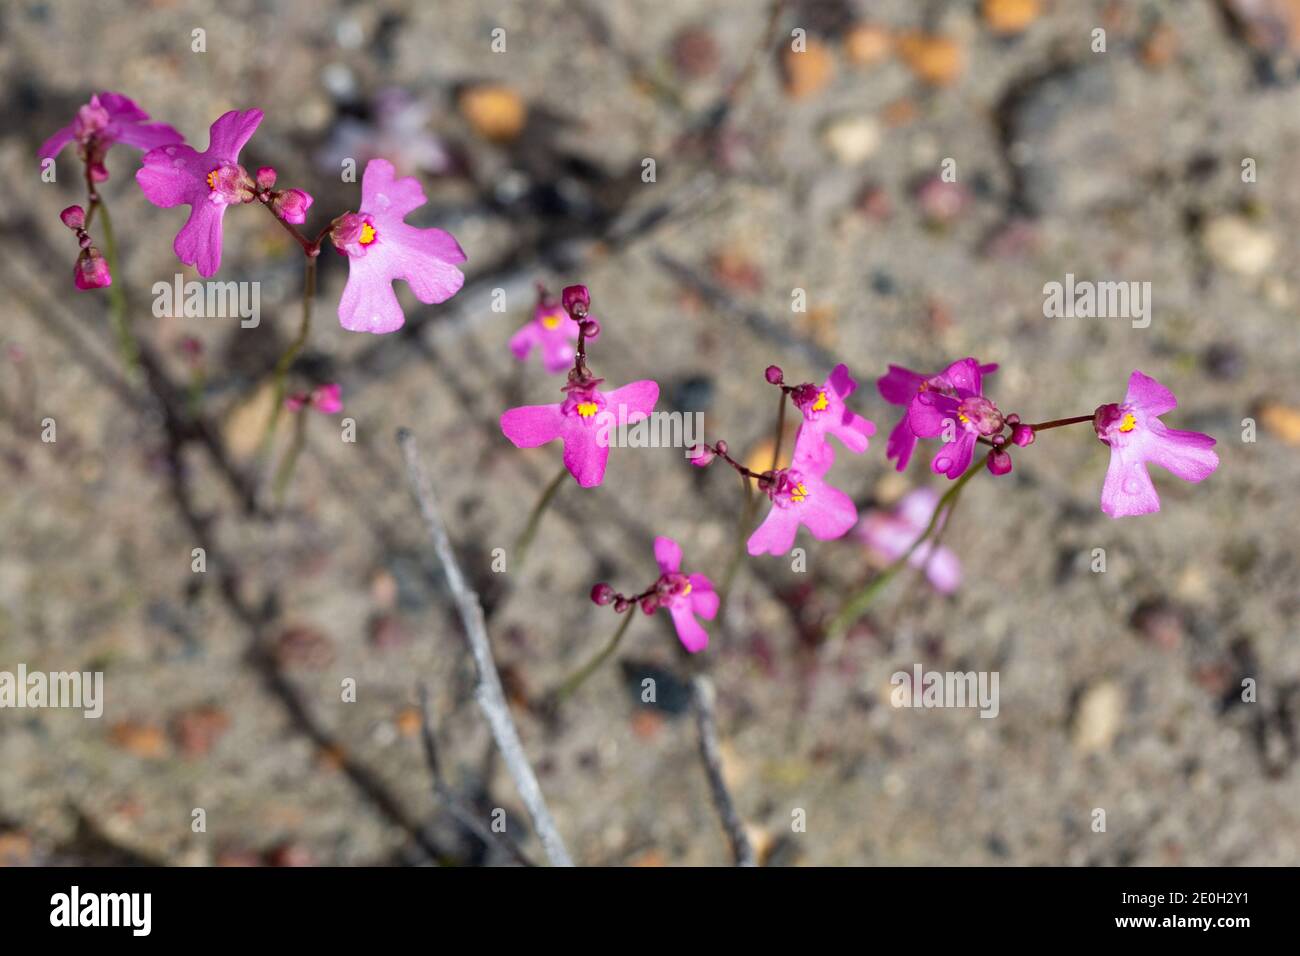 The small pink flowers of the annual Bladderwort Utricularia multifida found northeast of Augusta in Western Australia, view from above Stock Photo